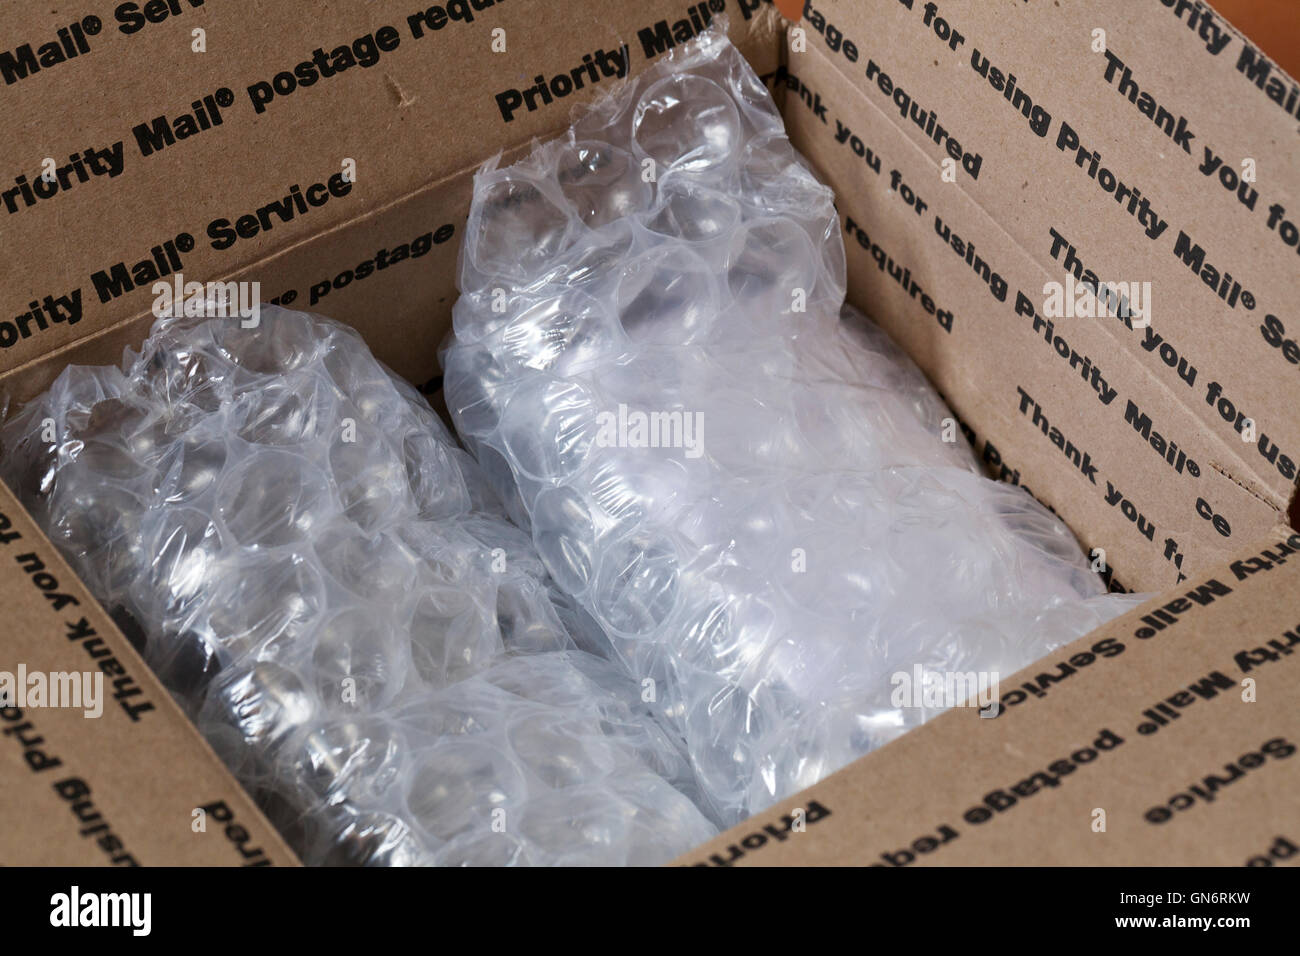 Bubble Wrap Kunststoffverpackung in Box - USA Stockfoto